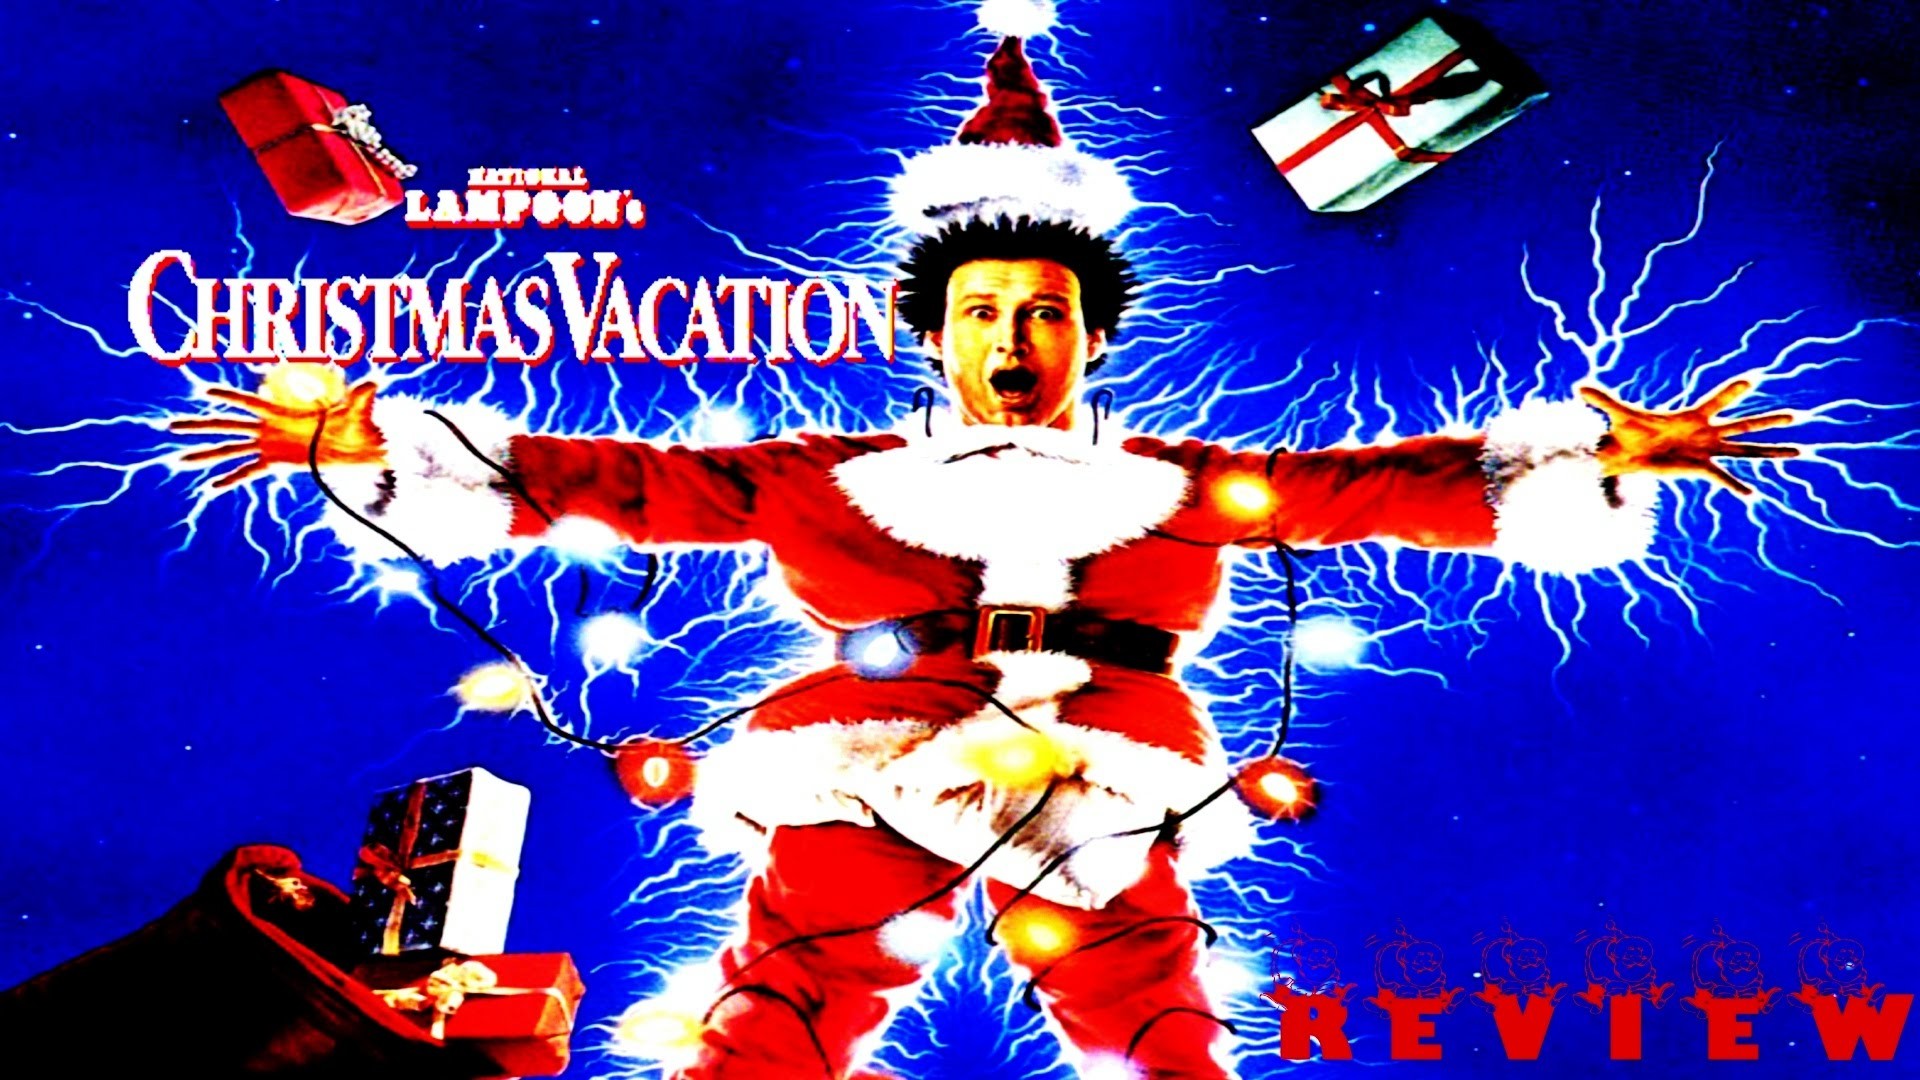 1920x1080 National Lampoon's Christmas Vacation (1989) MOVIE REVIEW!!!